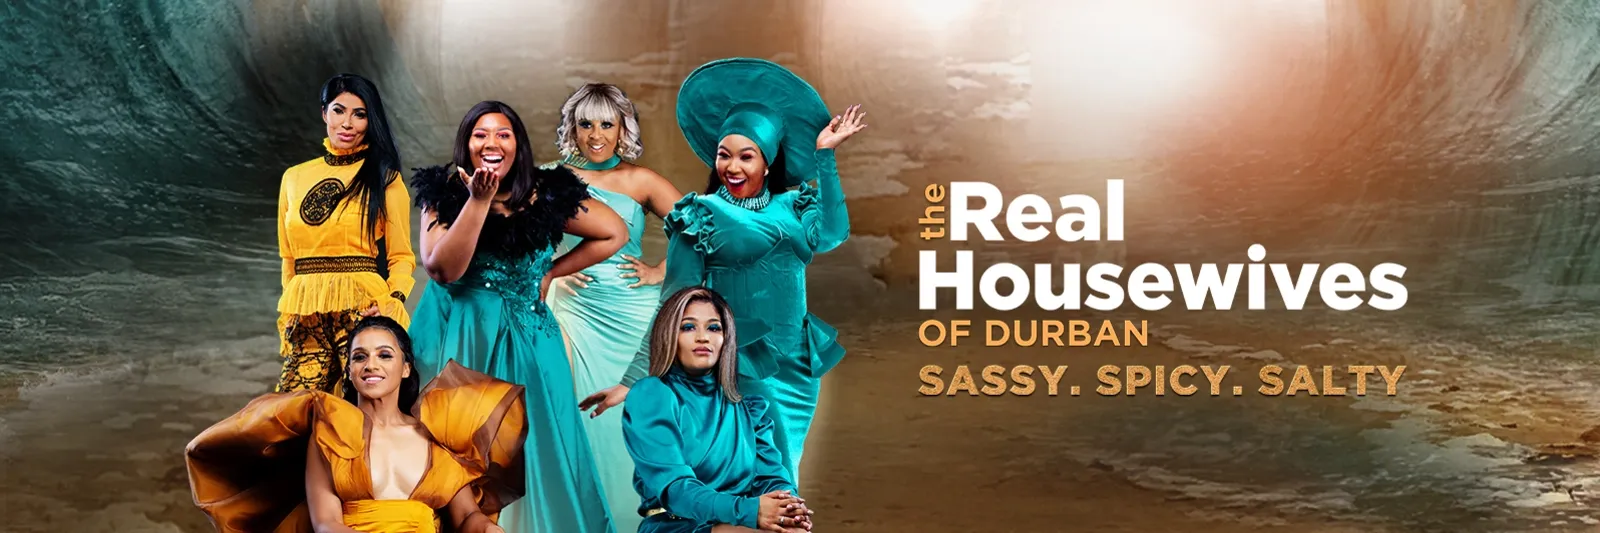 The Real Housewives Of Durban S04 (Episode 10 - 12 Added) 11